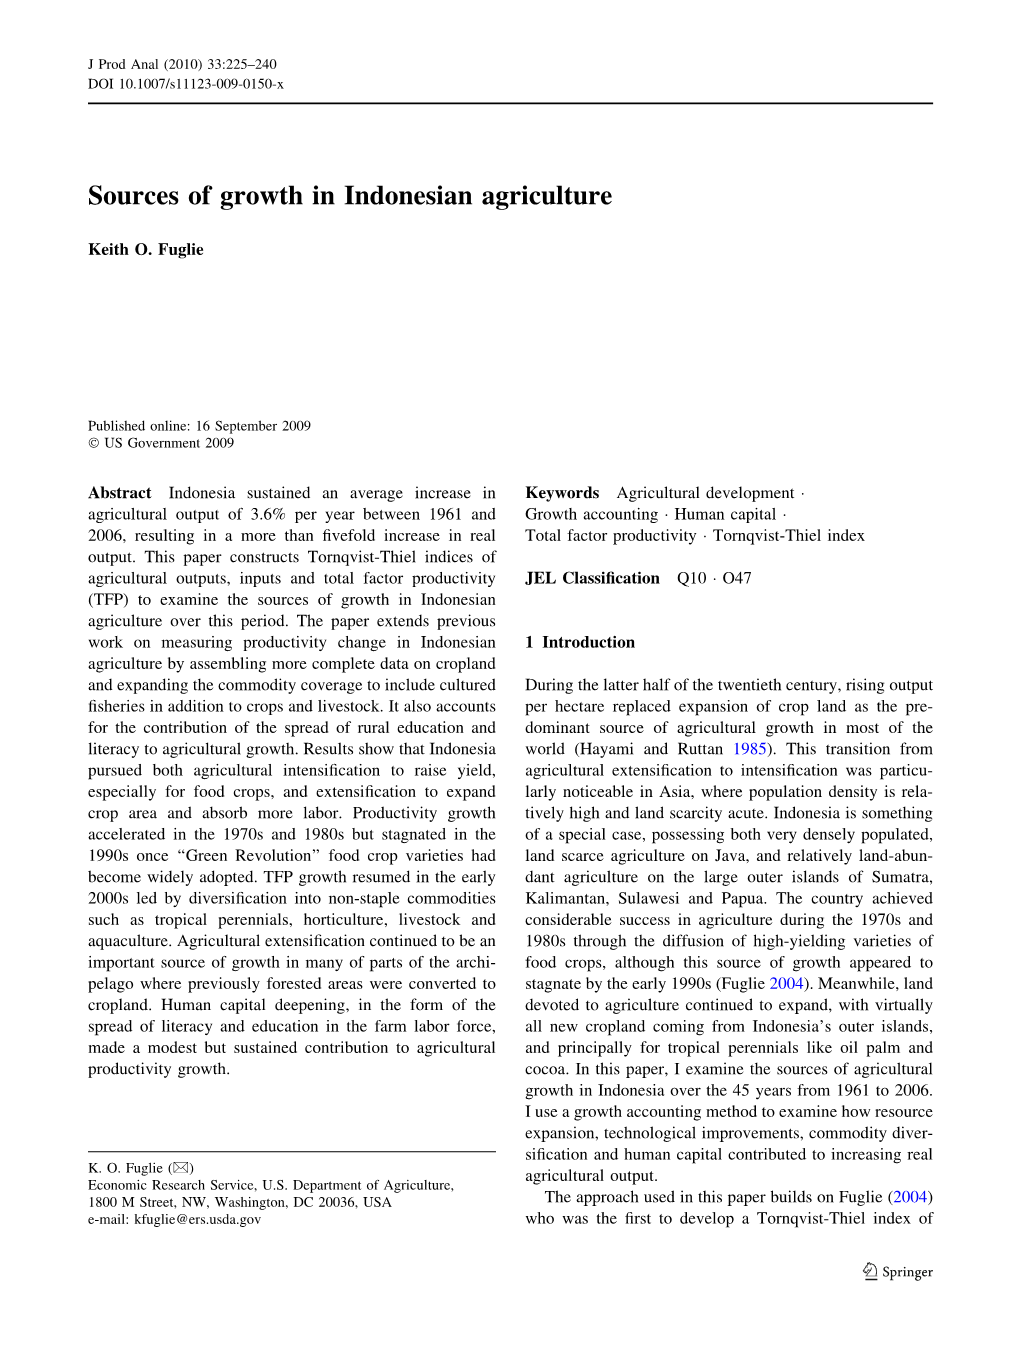 Sources of Growth in Indonesian Agriculture